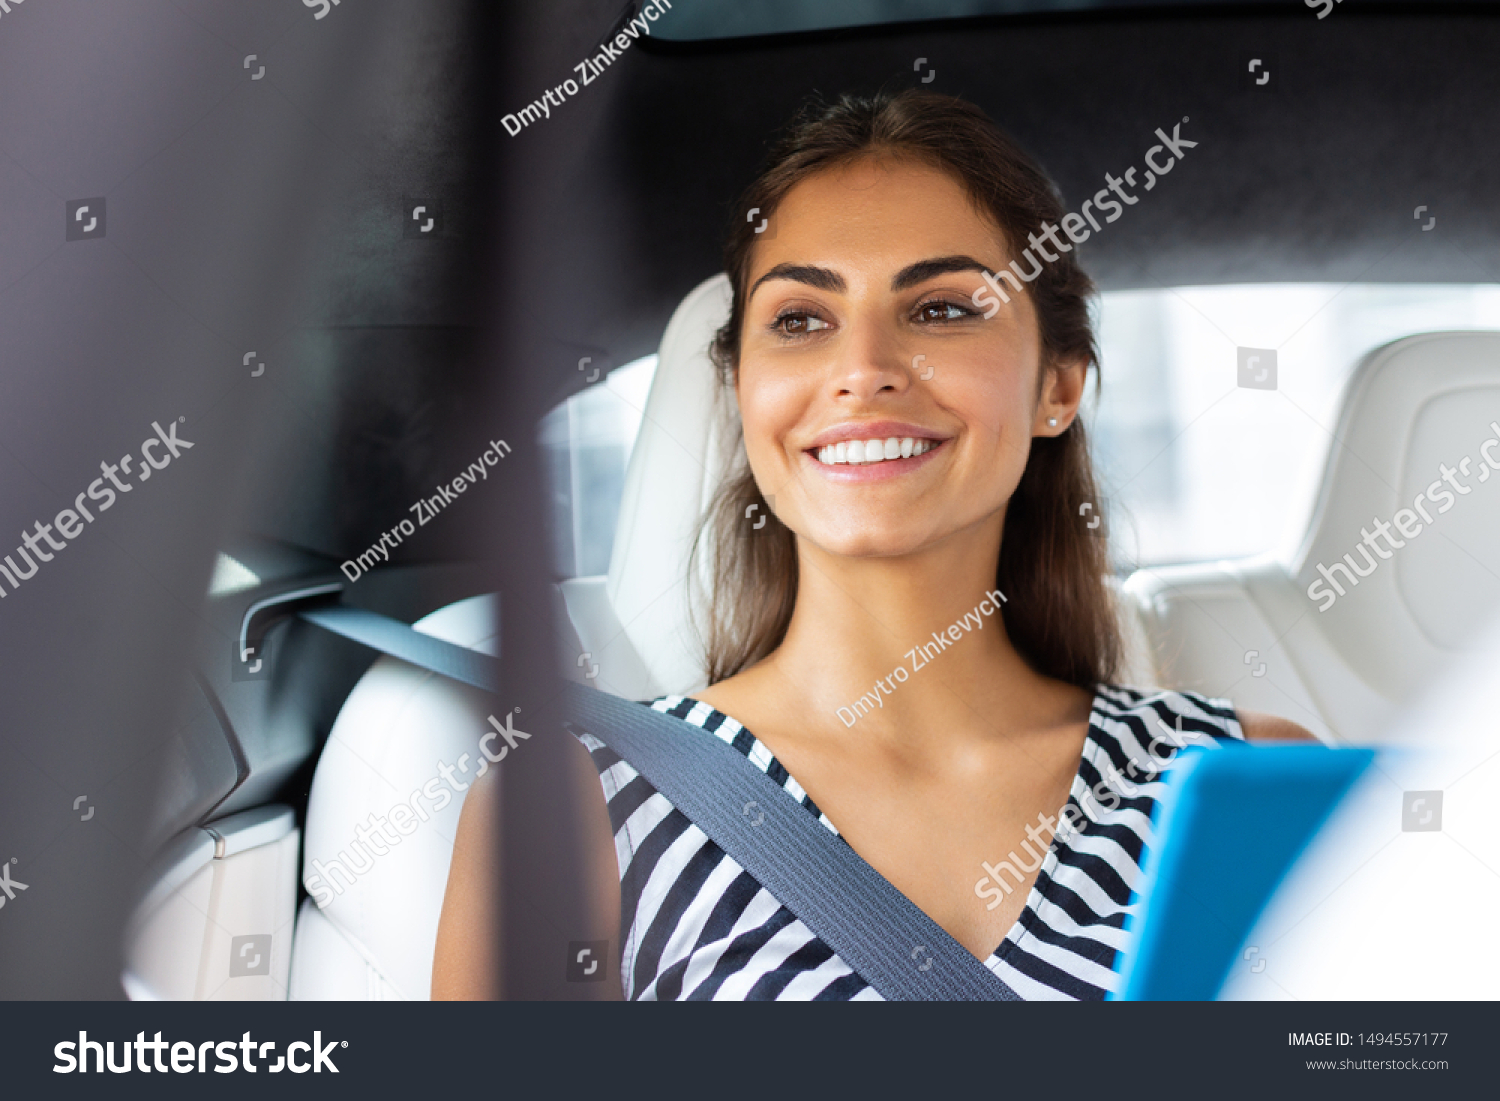 Beaming businesswoman. Beaming businesswoman holding tablet smiling while sitting in car #1494557177